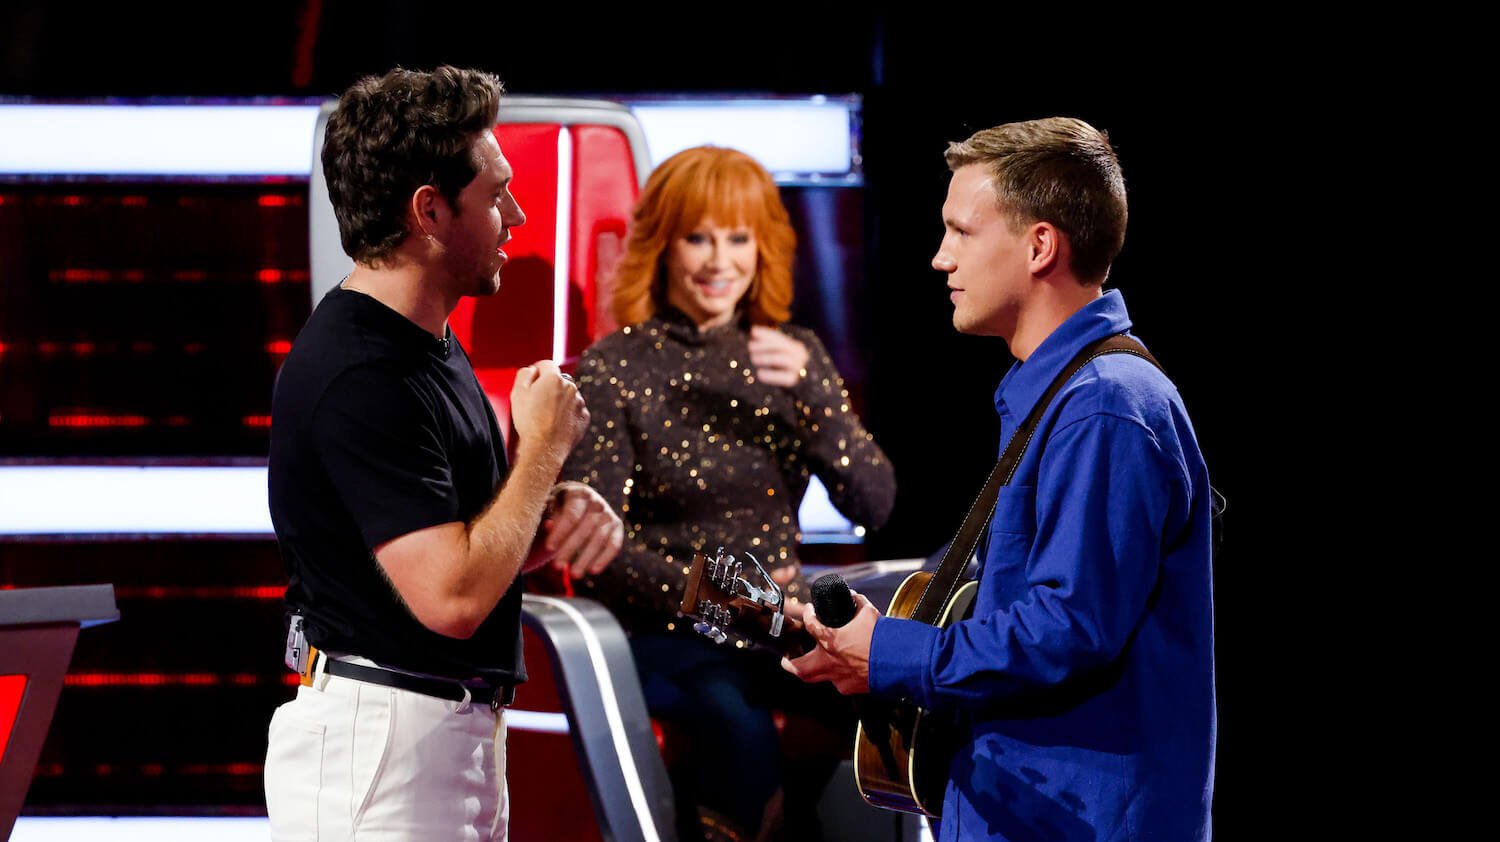 'The Voice' Season 24 coach Niall Horan talking to a competitor while Reba McEntire sits in the background